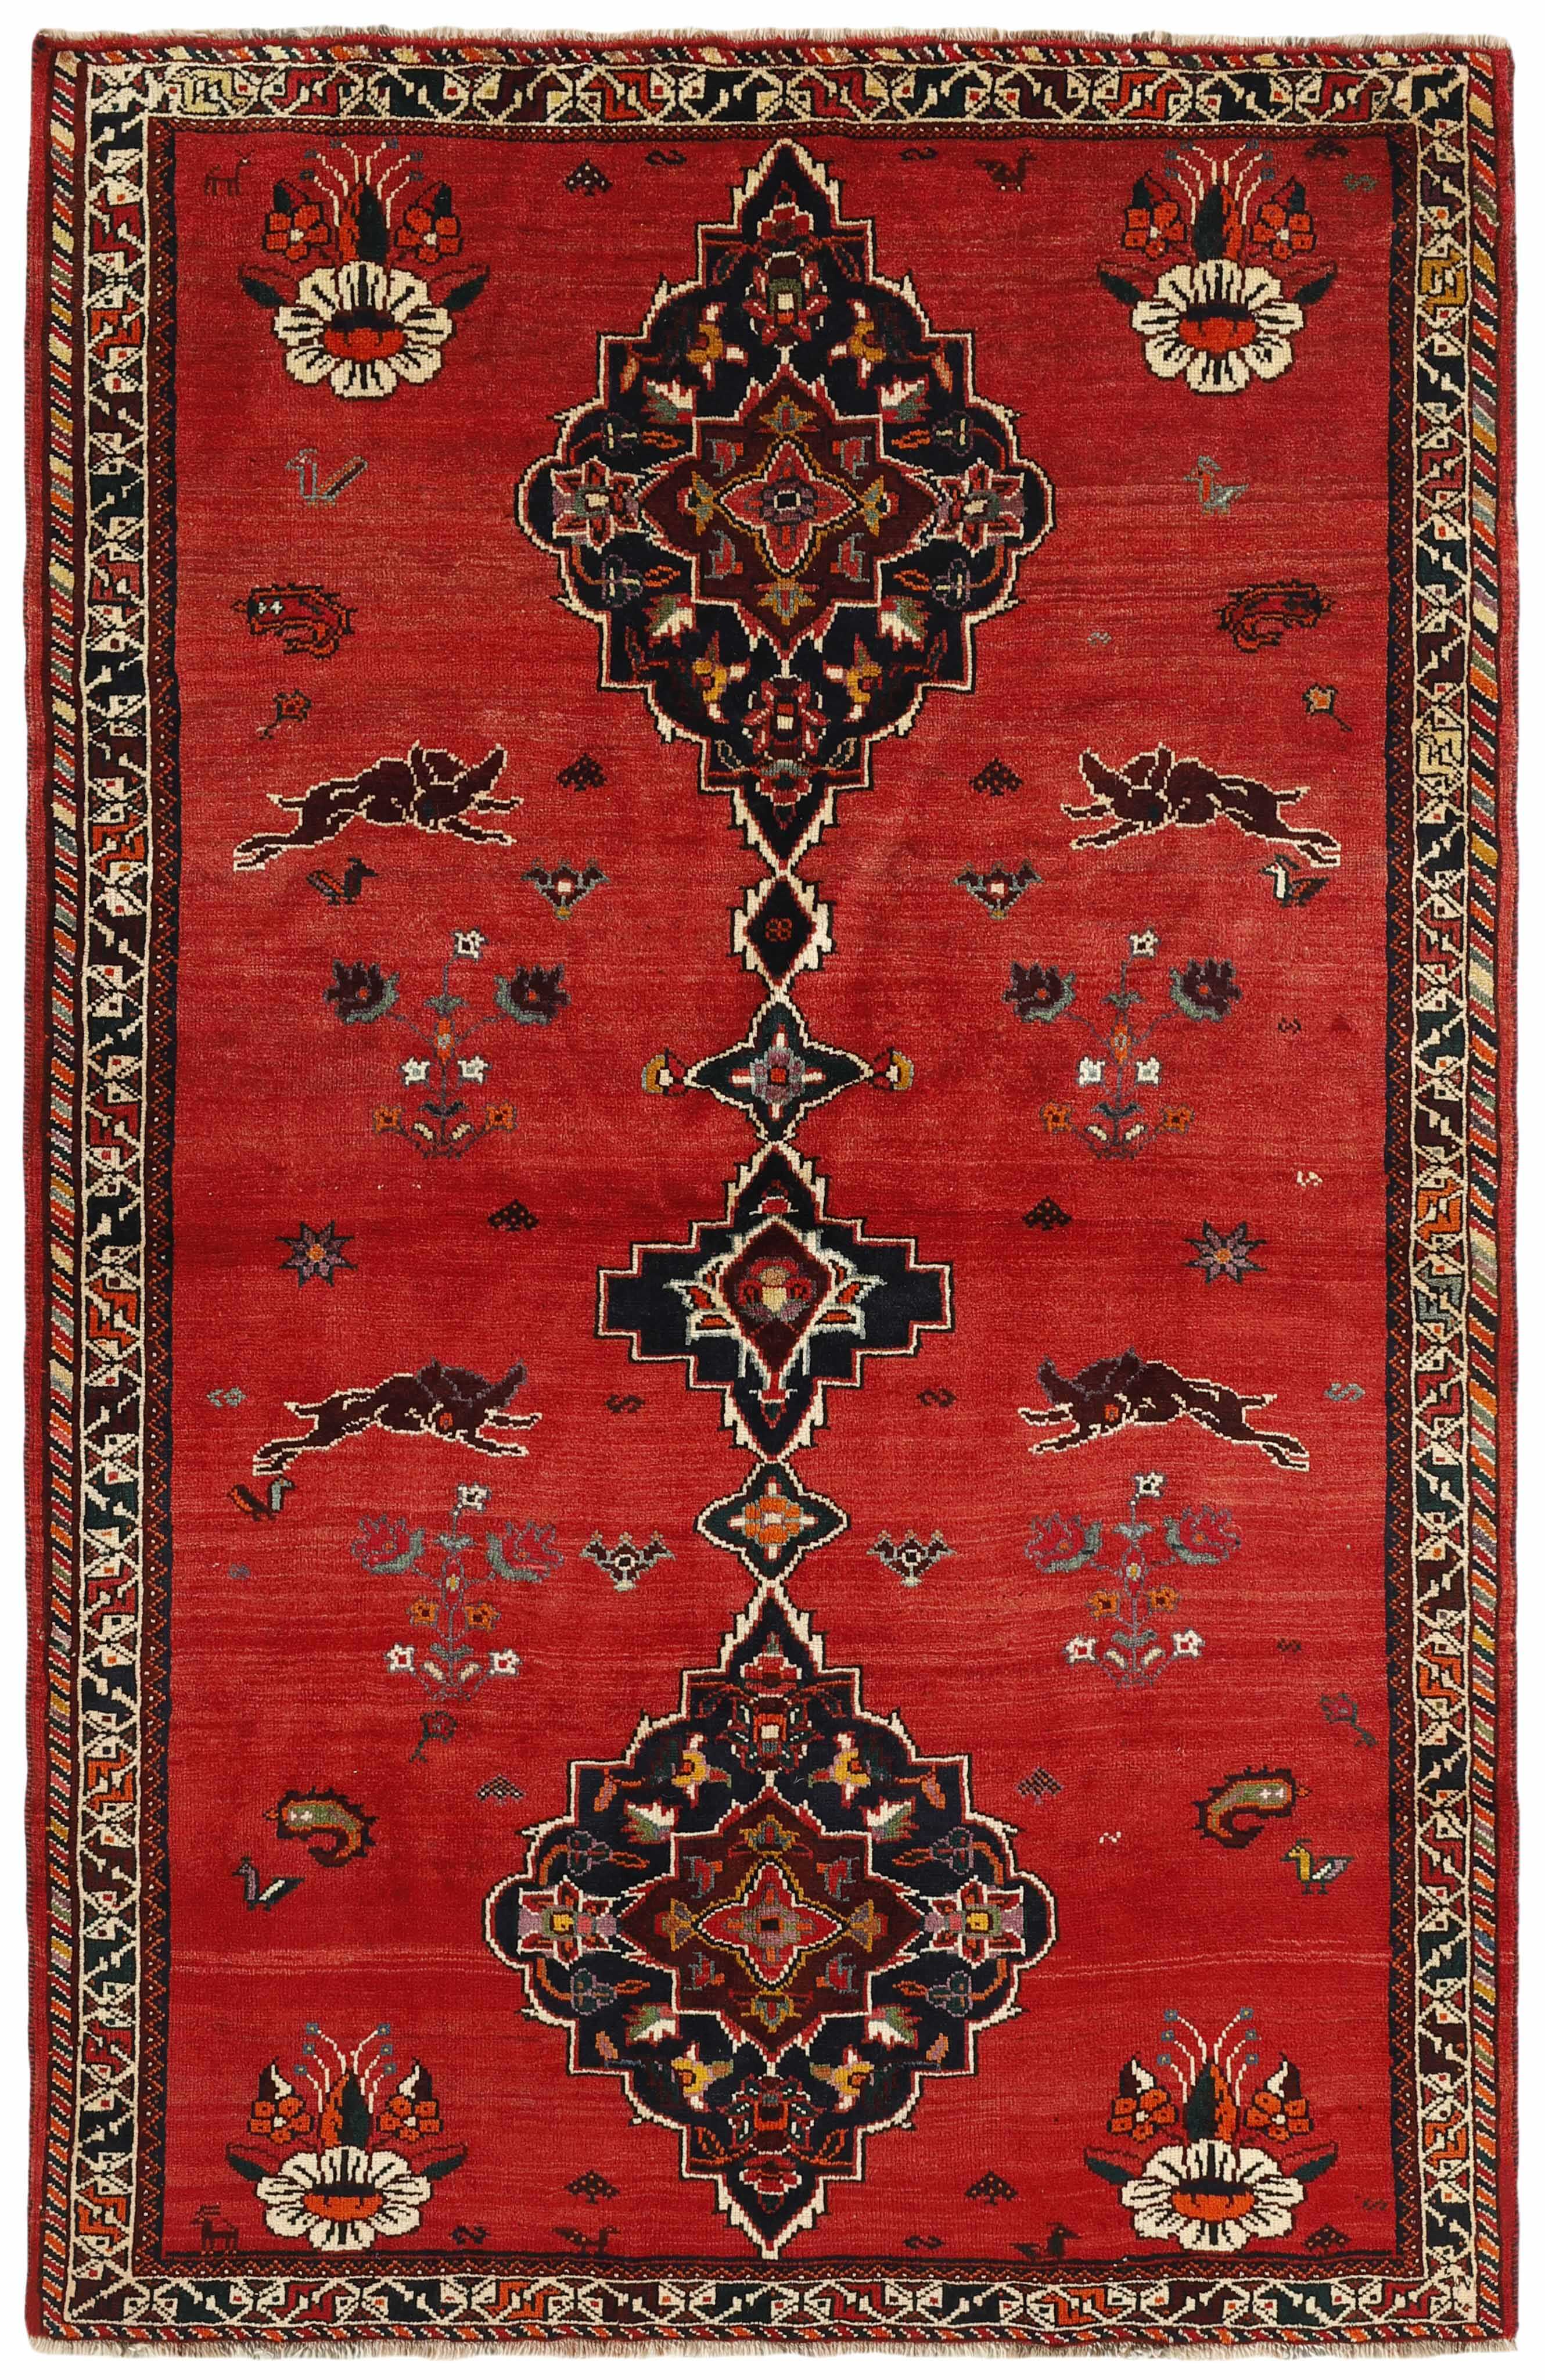 Authentic persian rug with a traditional tribal geometric pattern in red, black and beige